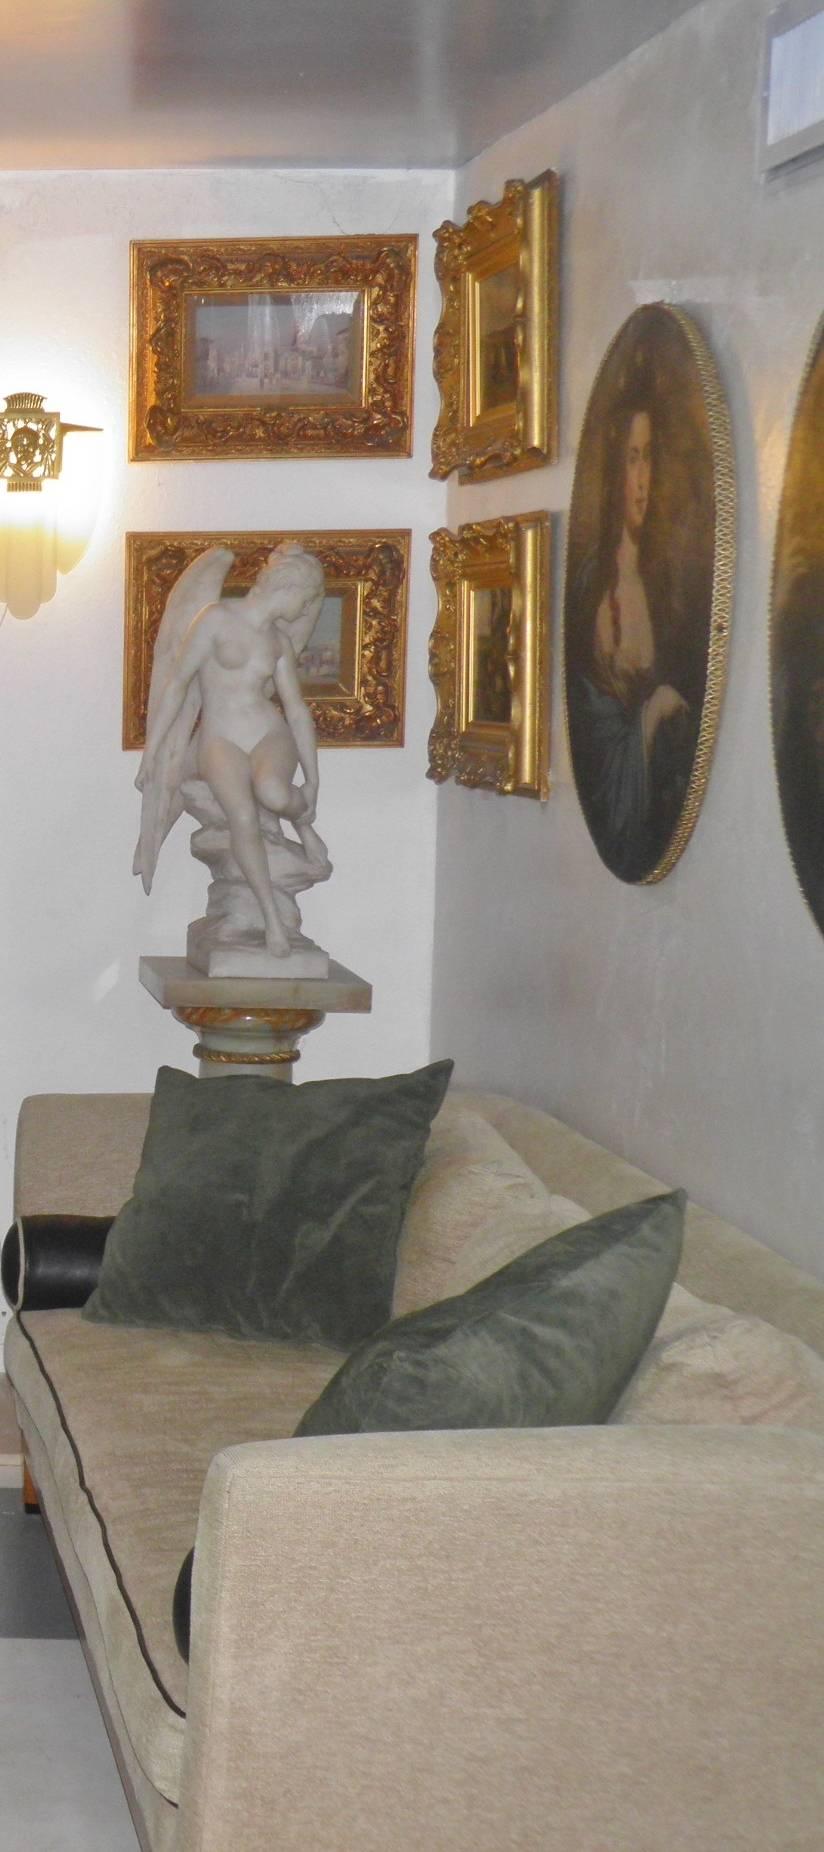 Tycoon's Italian Carrara Marble Angel Sculpture Signed A. Piazza, circa 1890 For Sale 1